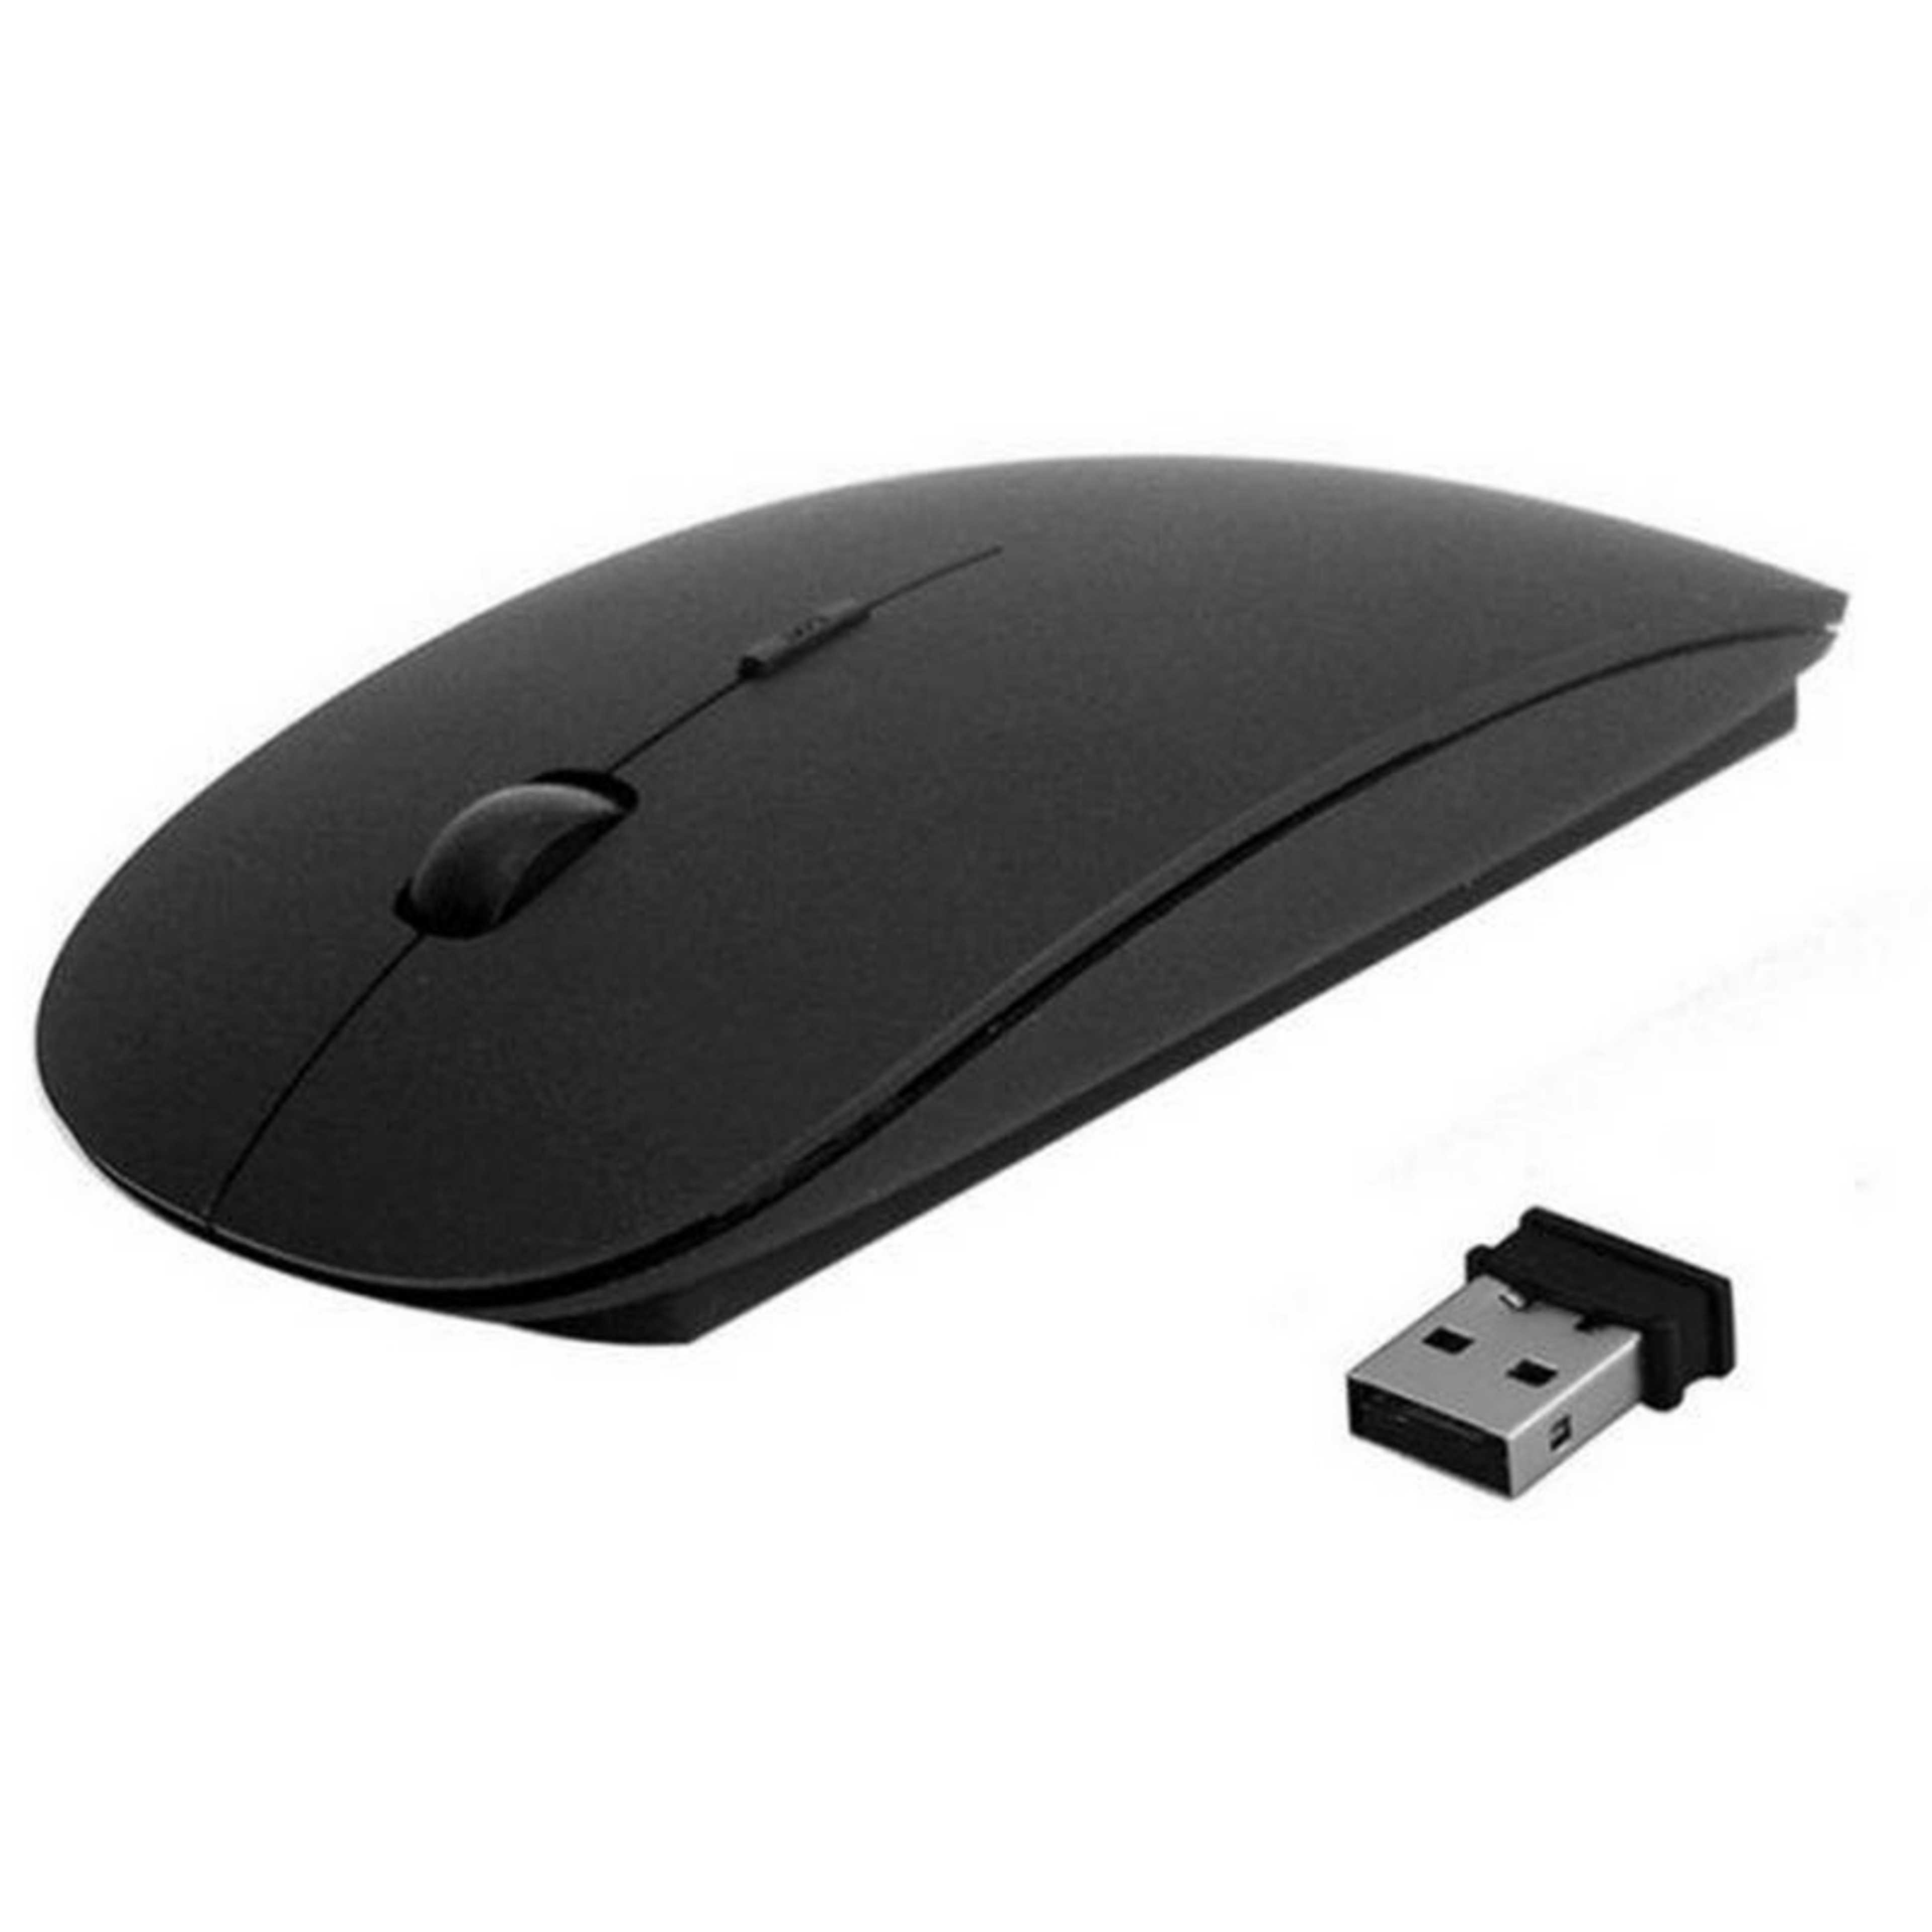 Wireless Mouse For Computer And Laptop - Black